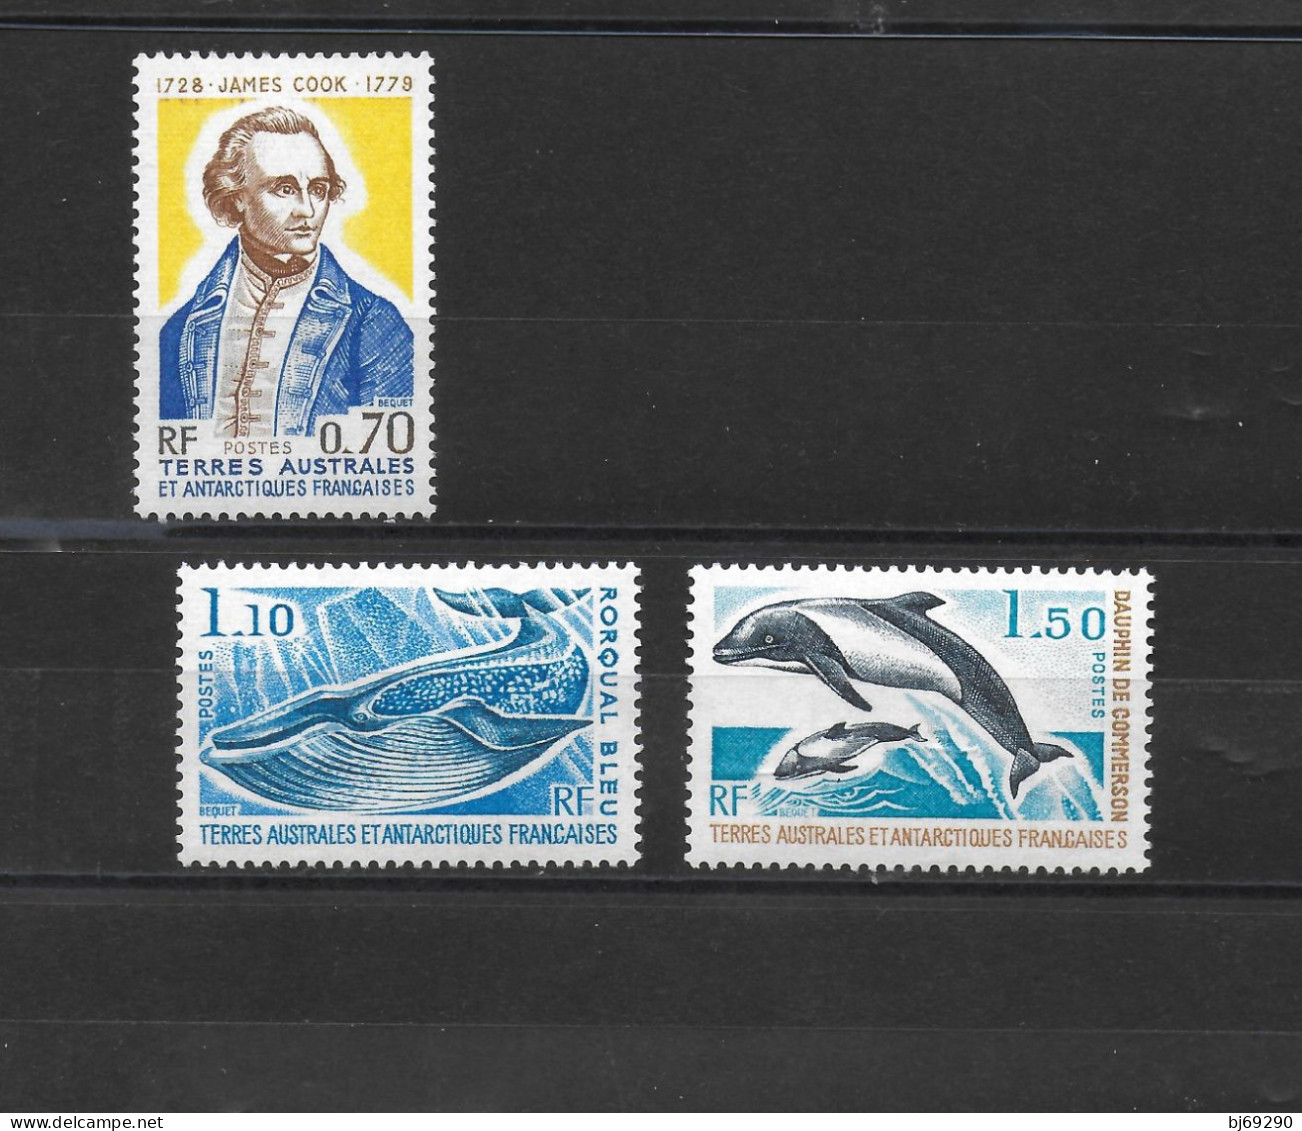 TAAF - 1976 - 77 : Timbres 63-64-65 Neufs ** - Neufs